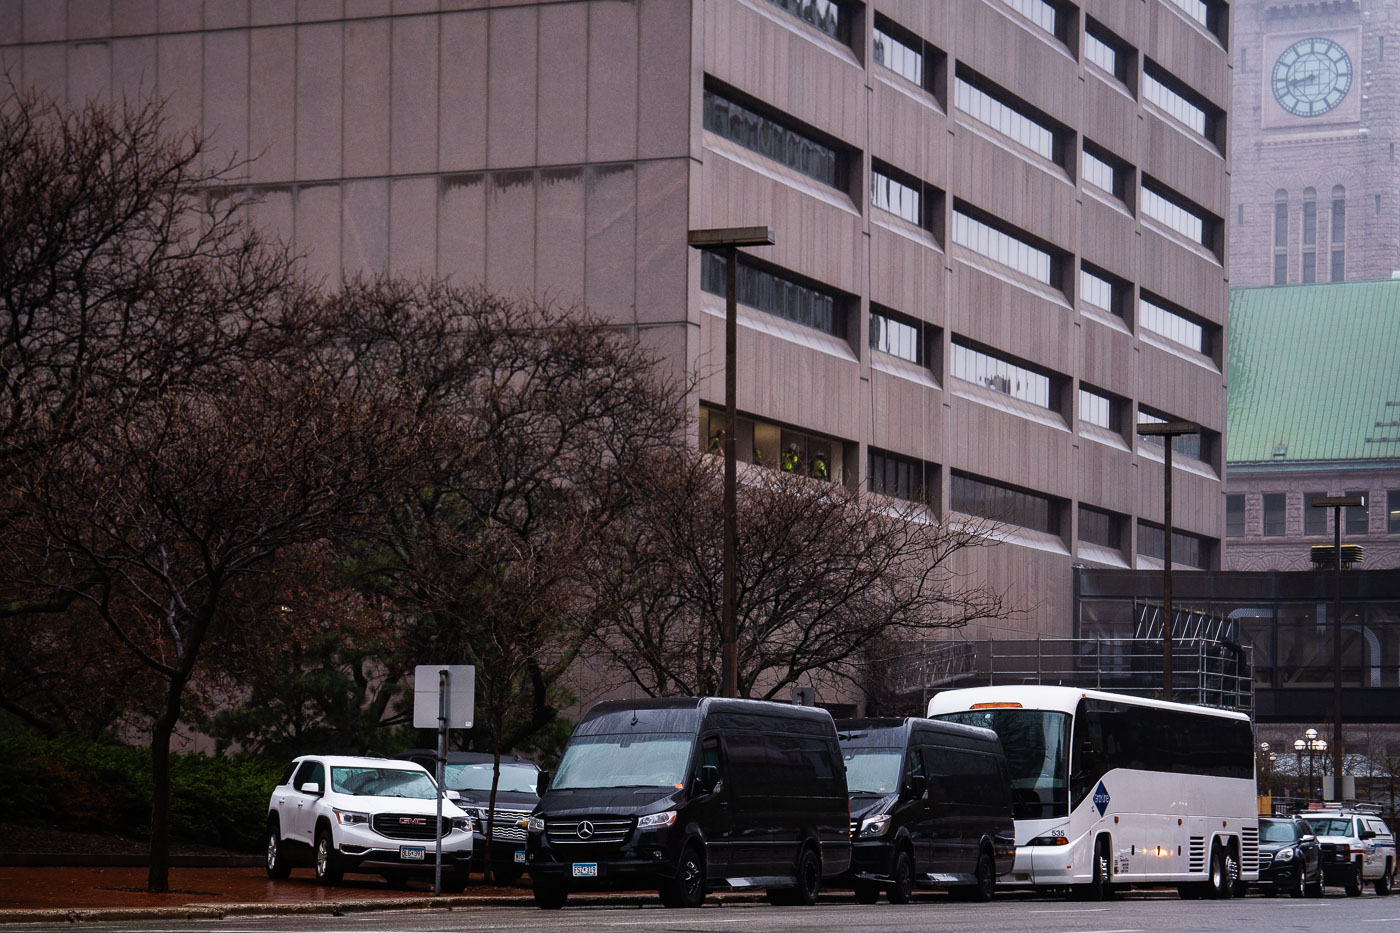 Buses line the street outside court hearing